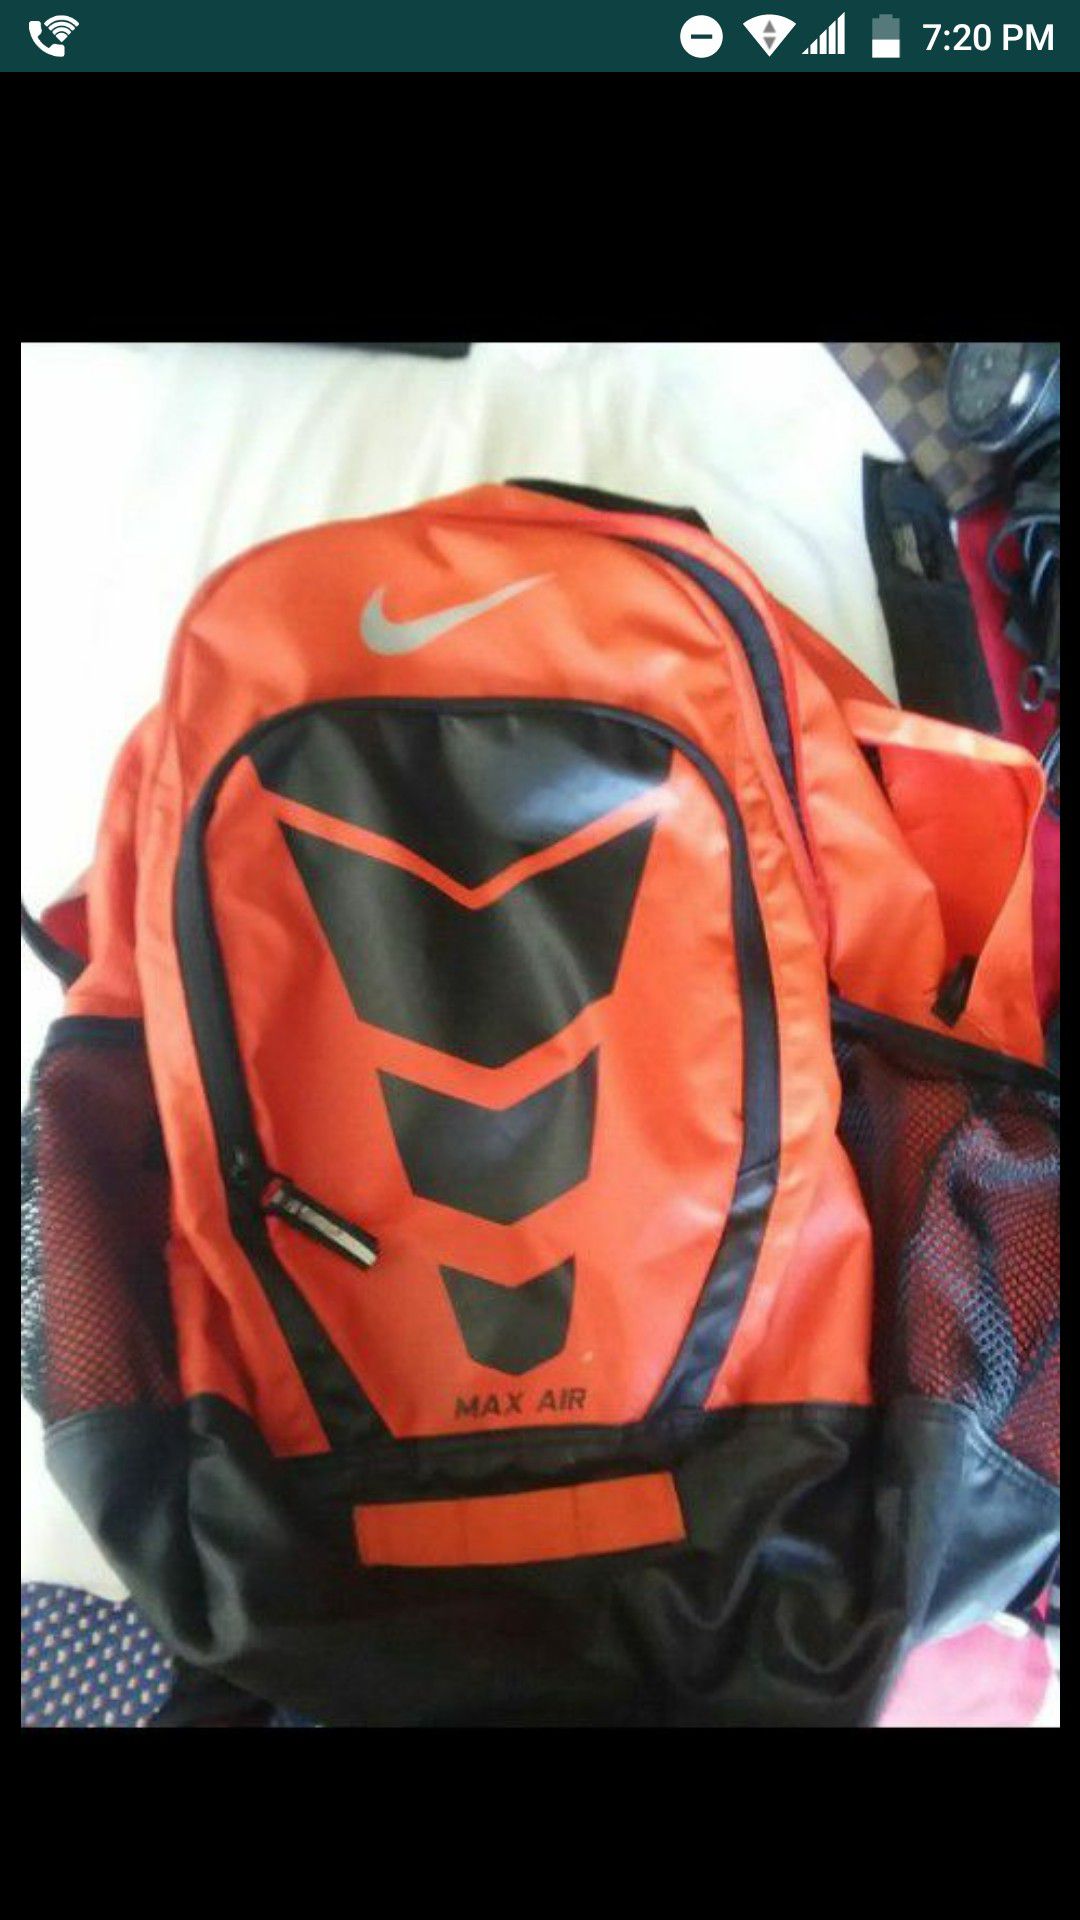 Nike air Max back pack asking 90.00 obo or for trade also lmk ASAP